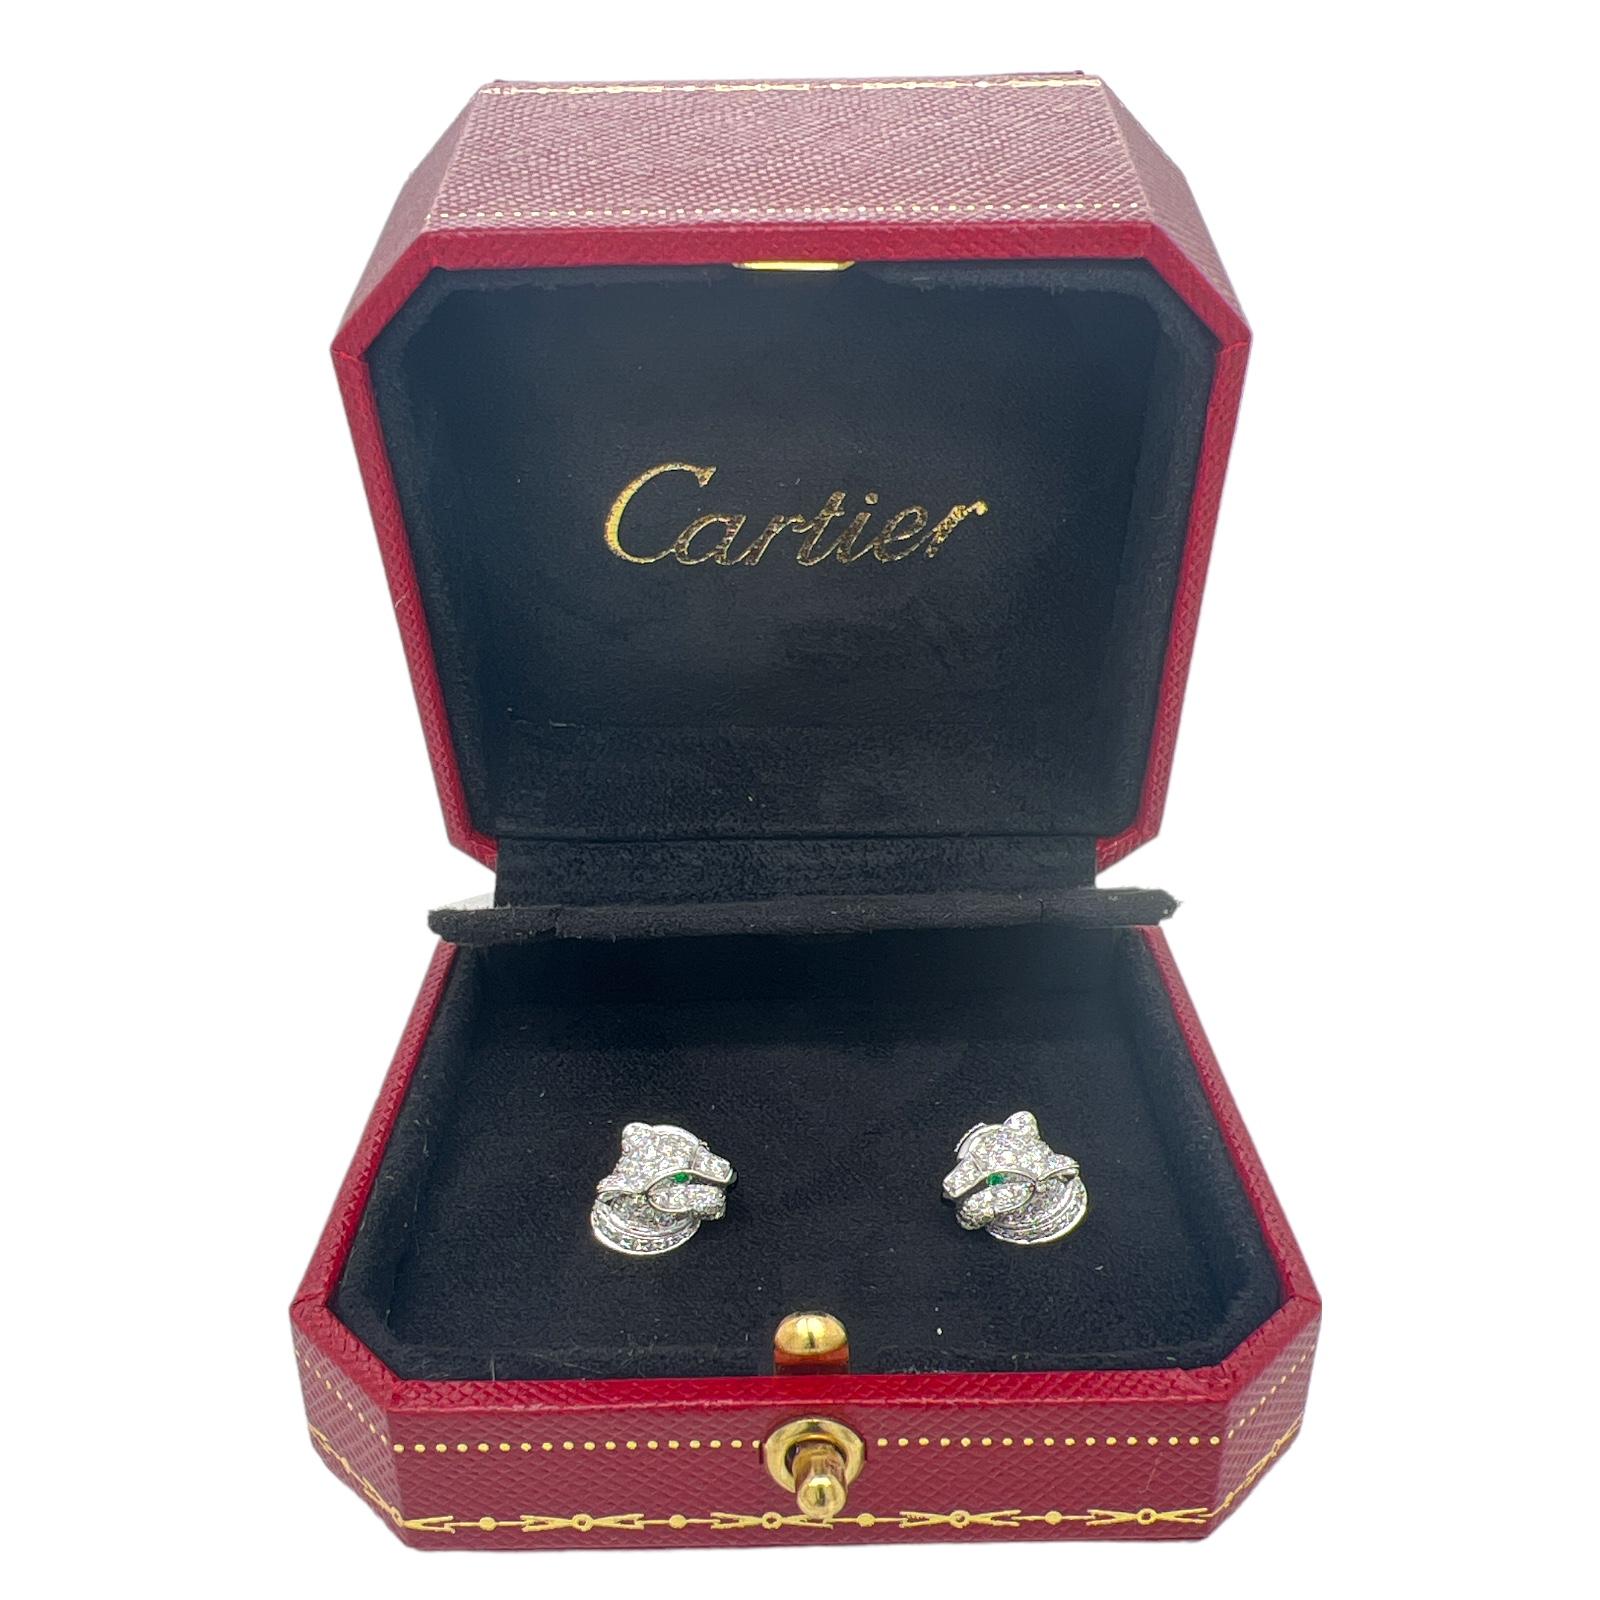 Beautiful Cartier Panthére diamond earrings crafted in 18 karat white gold. The earrings feature 63 round brilliant cut diamonds weighing approximately .77 CTW, round emerald eyes, and onyx nose. The earrings measure 12.7mm in width. Come with